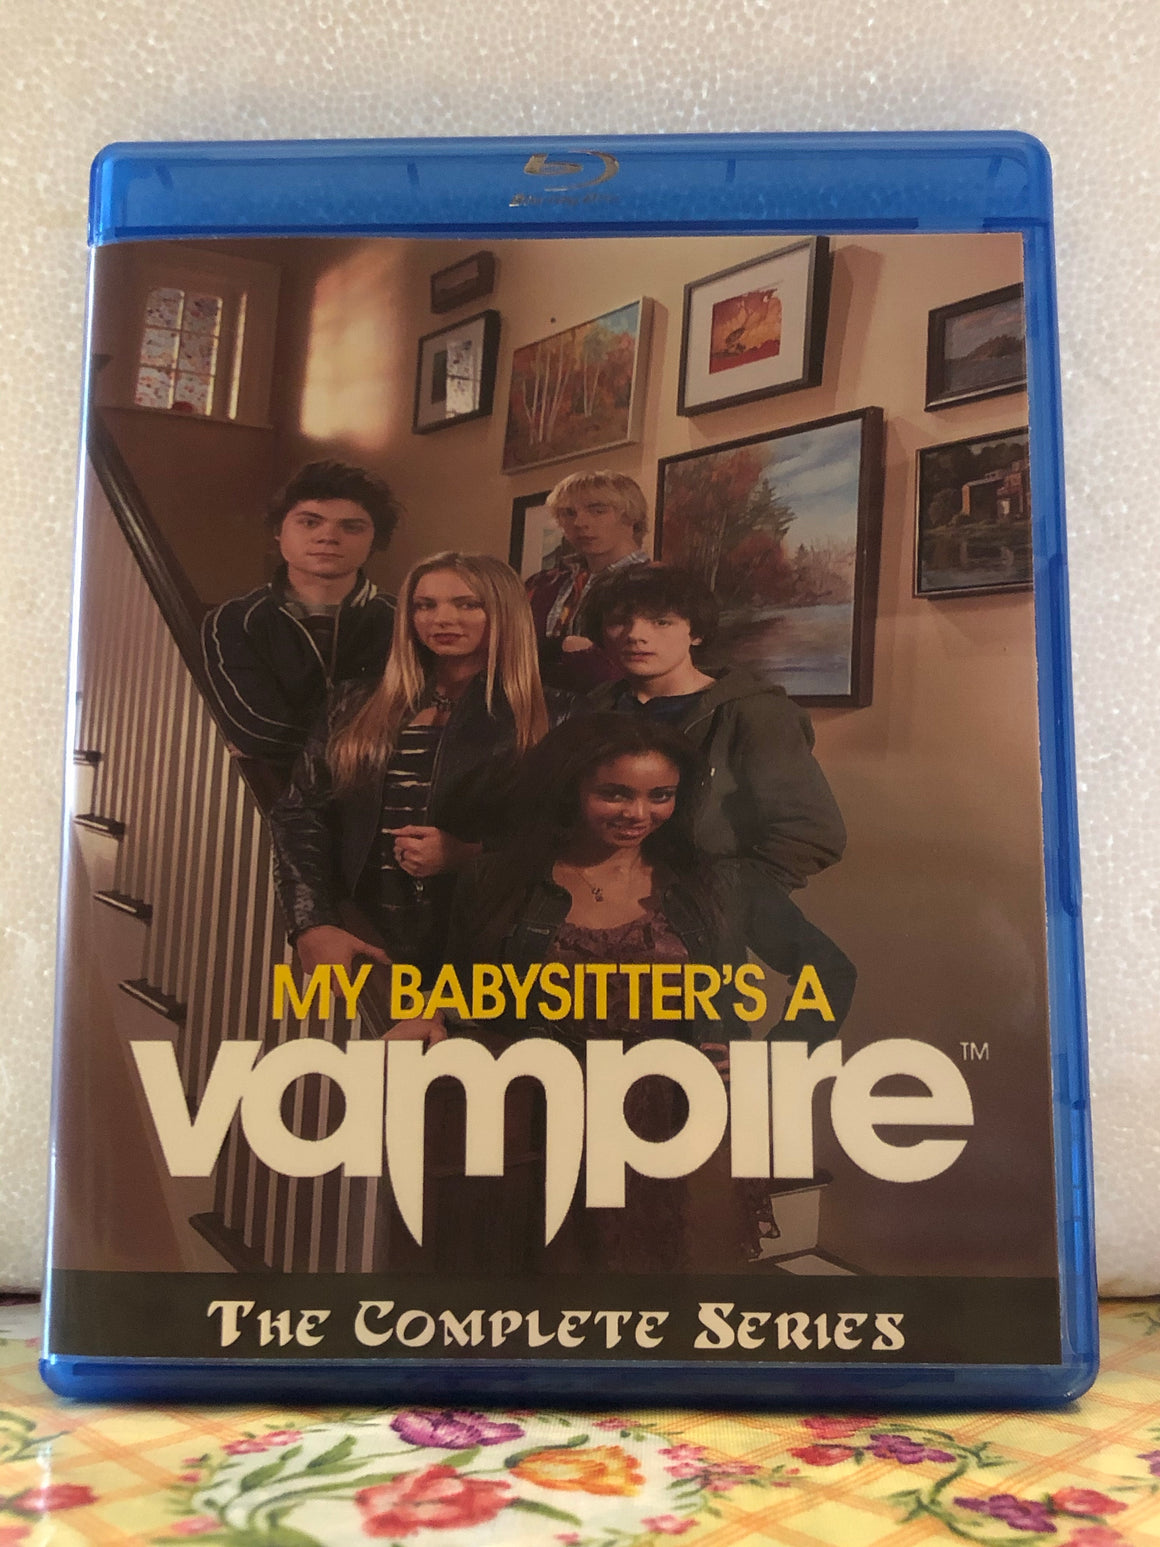 fred the babysitter a vampire